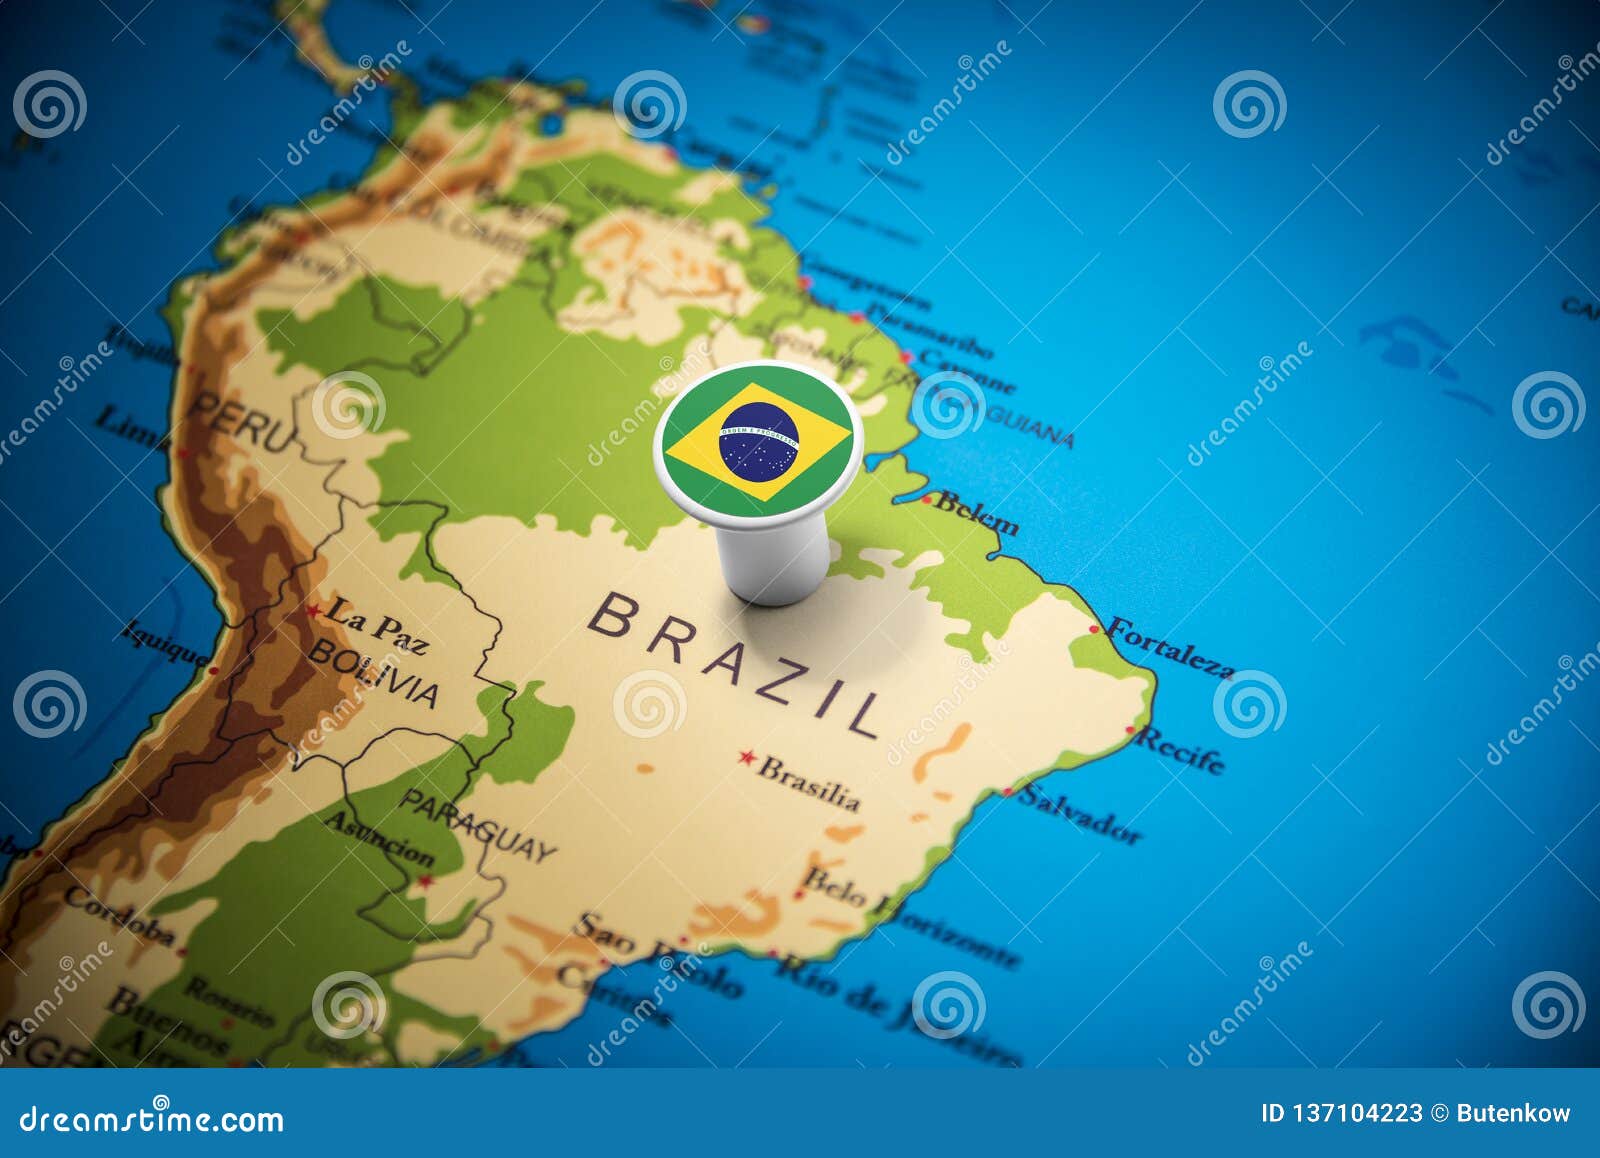 brazil marked with a flag on the map